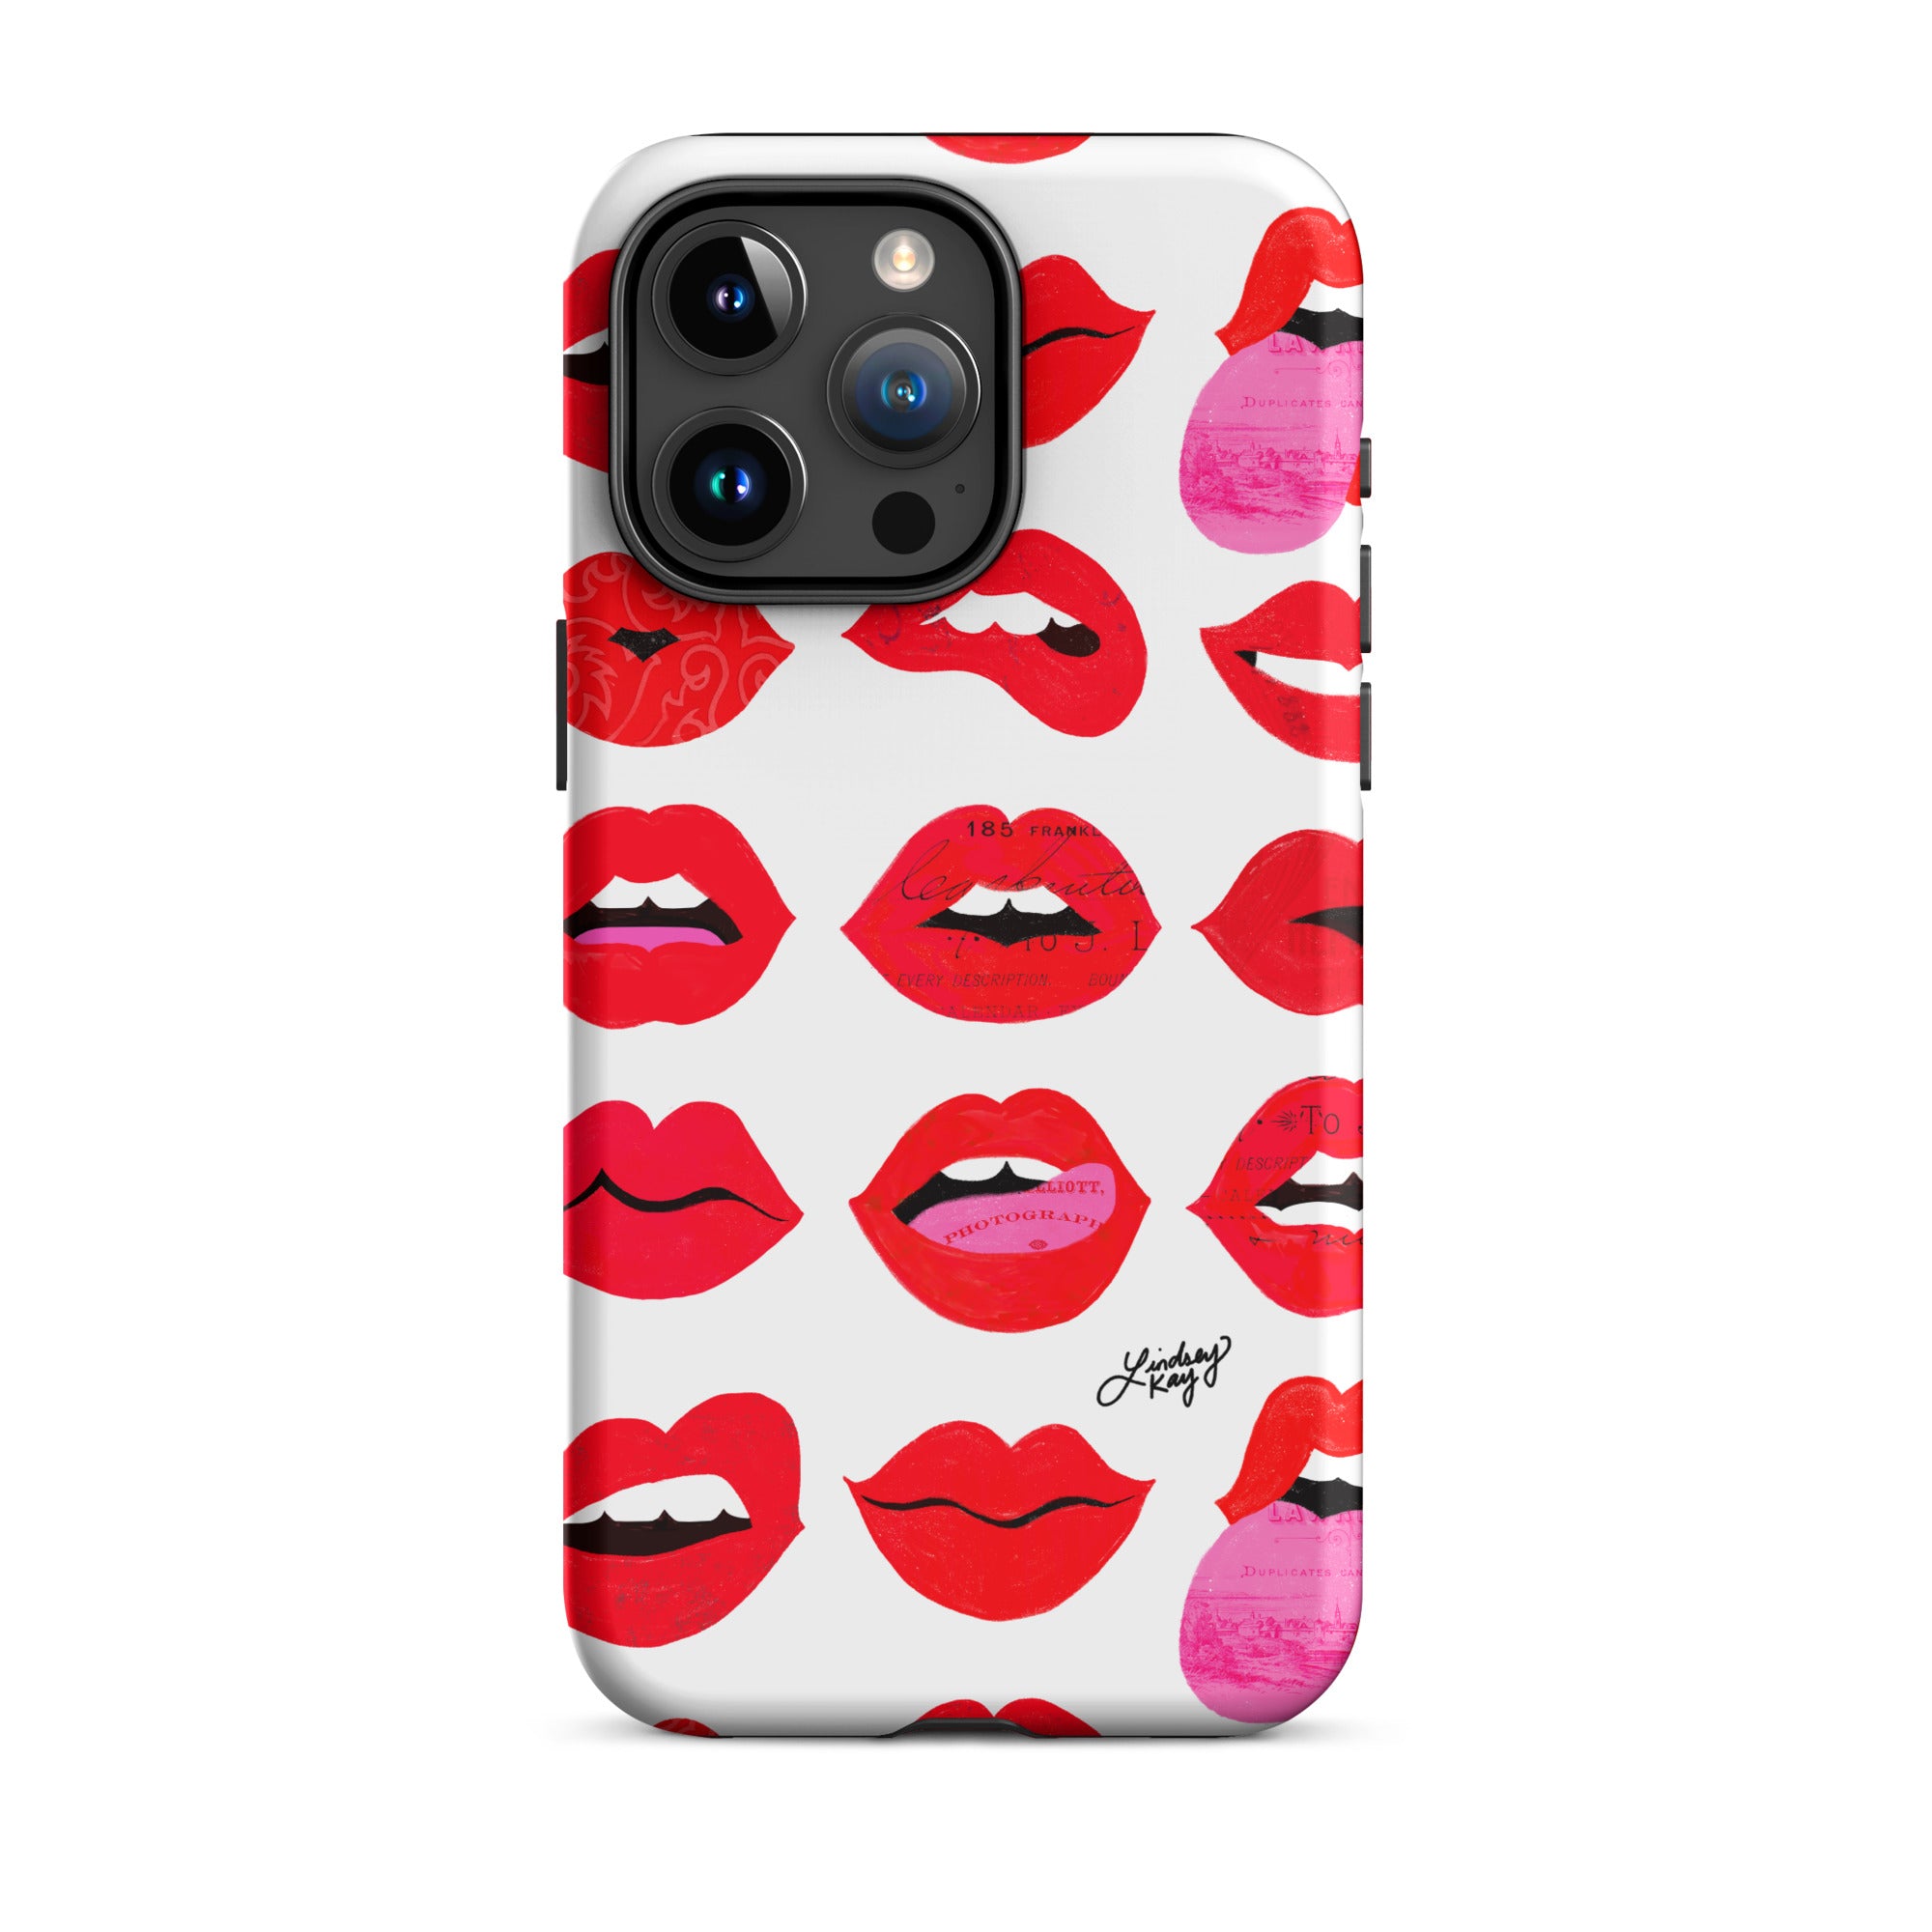 lips of love illustration iphone tough case cover mobile accessories